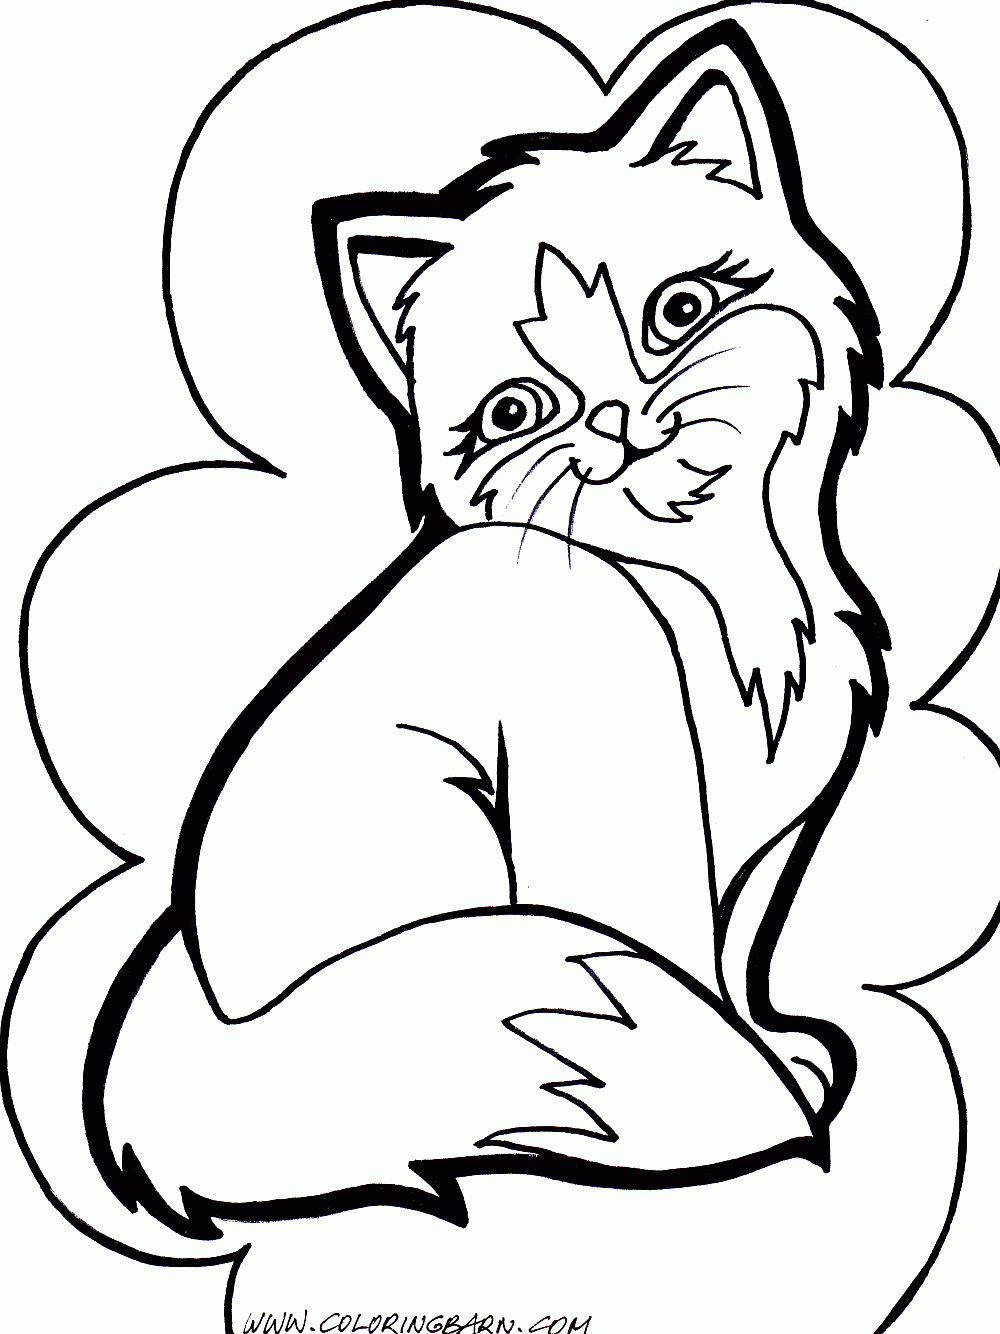 free-cat-and-kitten-coloring-page-download-free-cat-and-kitten